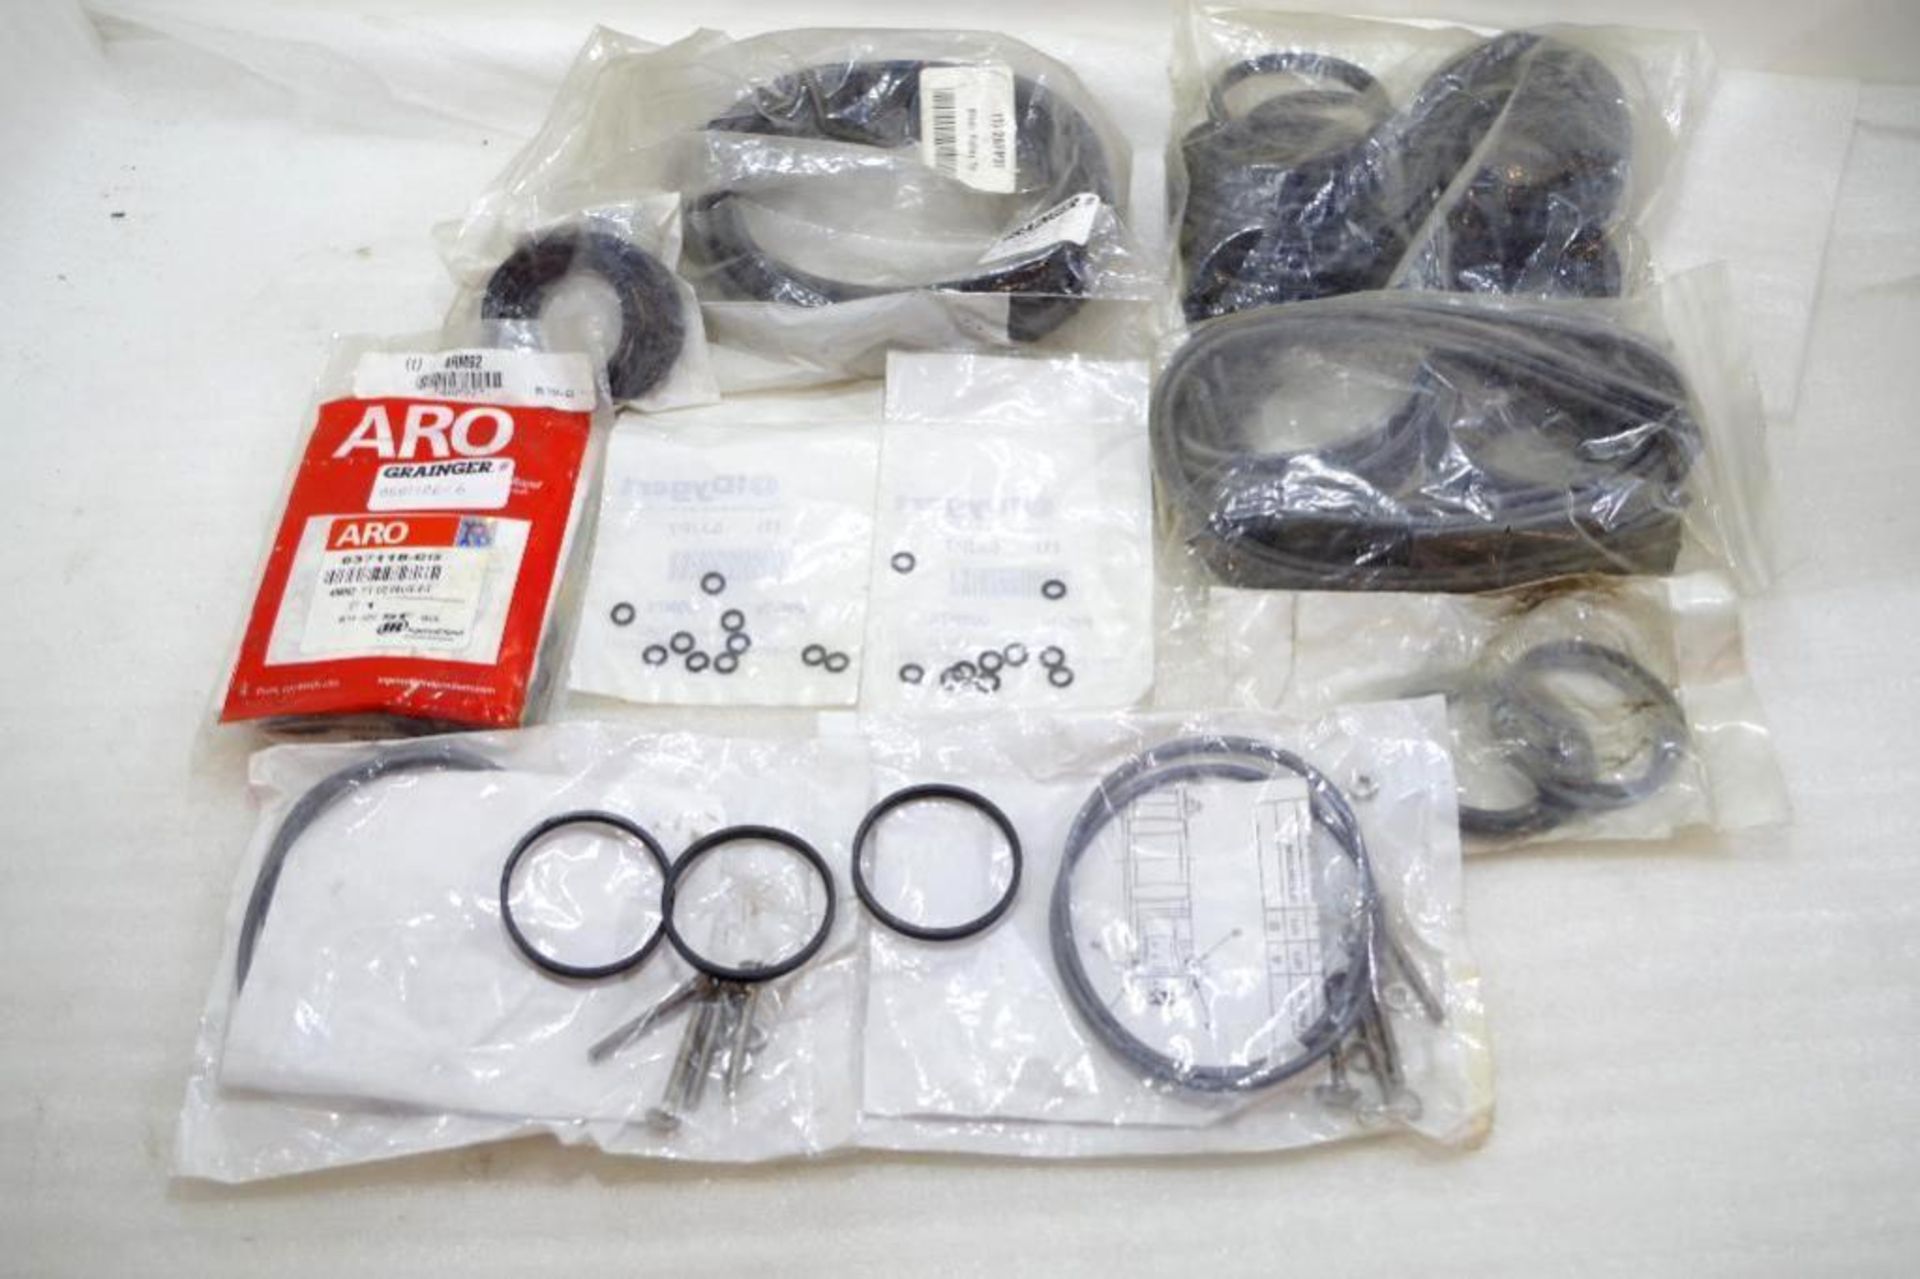 Assorted Rubber Parts & Accessories: O-Rings, Blade Rubber Tire, Rubber Banding, ARO Valve Kit